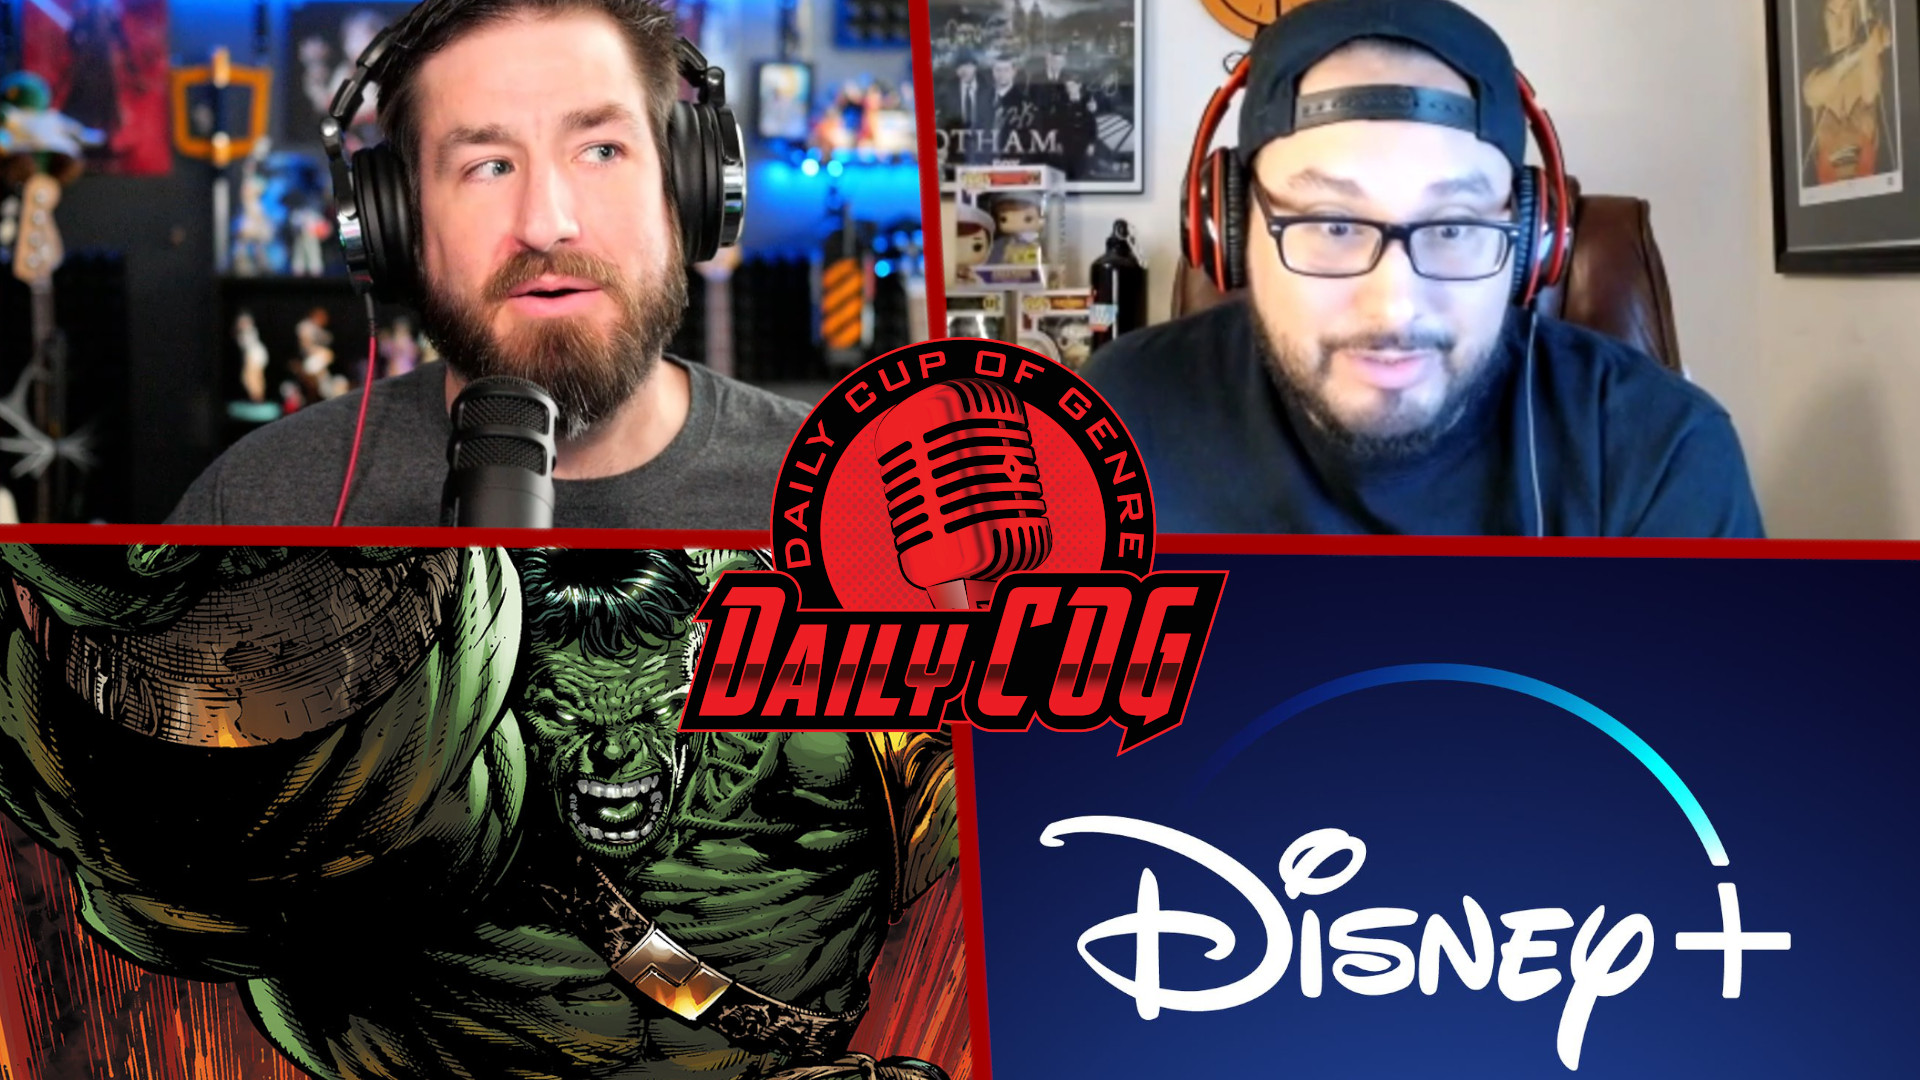 WOW! World War Hulk Teased By Ruffalo & Disney Inflates Numbers | Daily COG